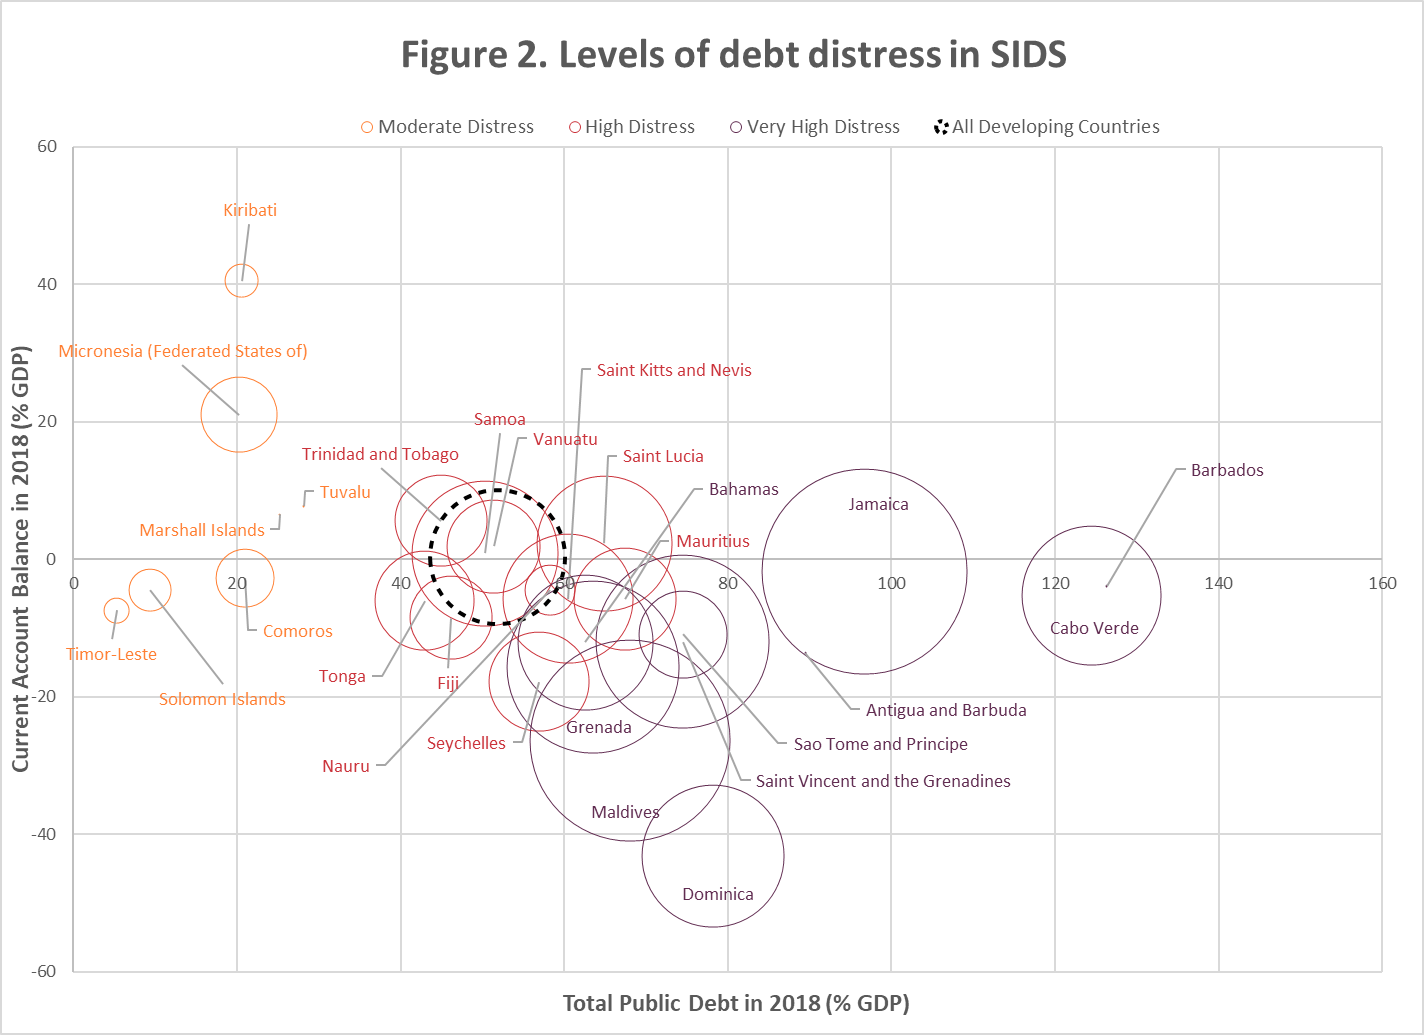 Levels of debt distress in SIDS